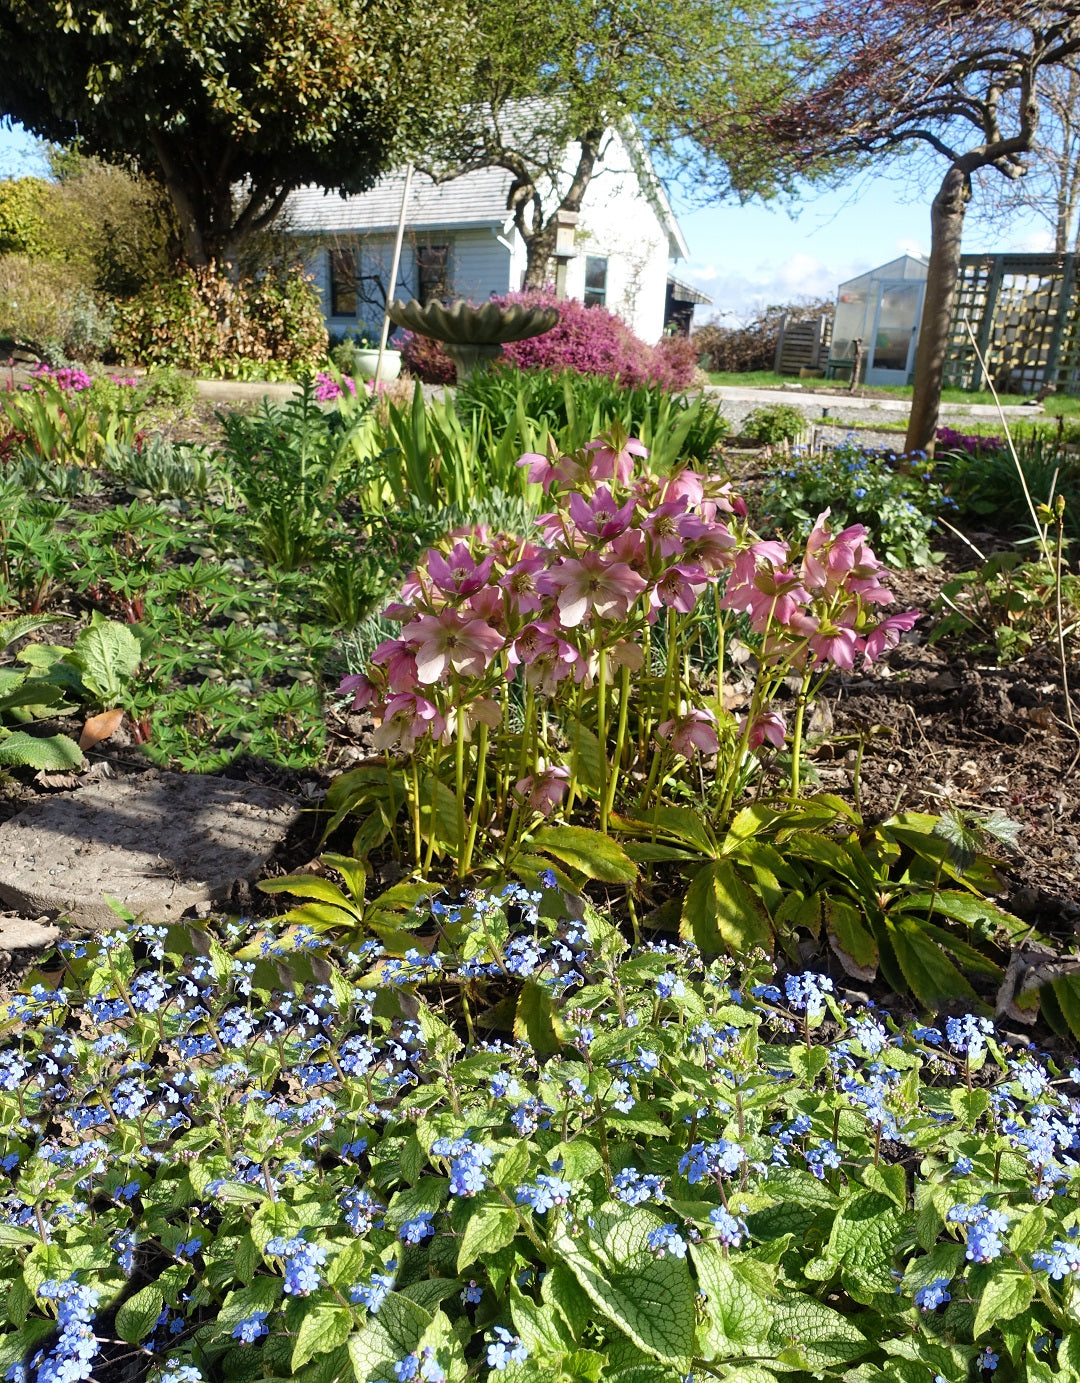 Spring flowers blooming at London Heritage Farmhouse